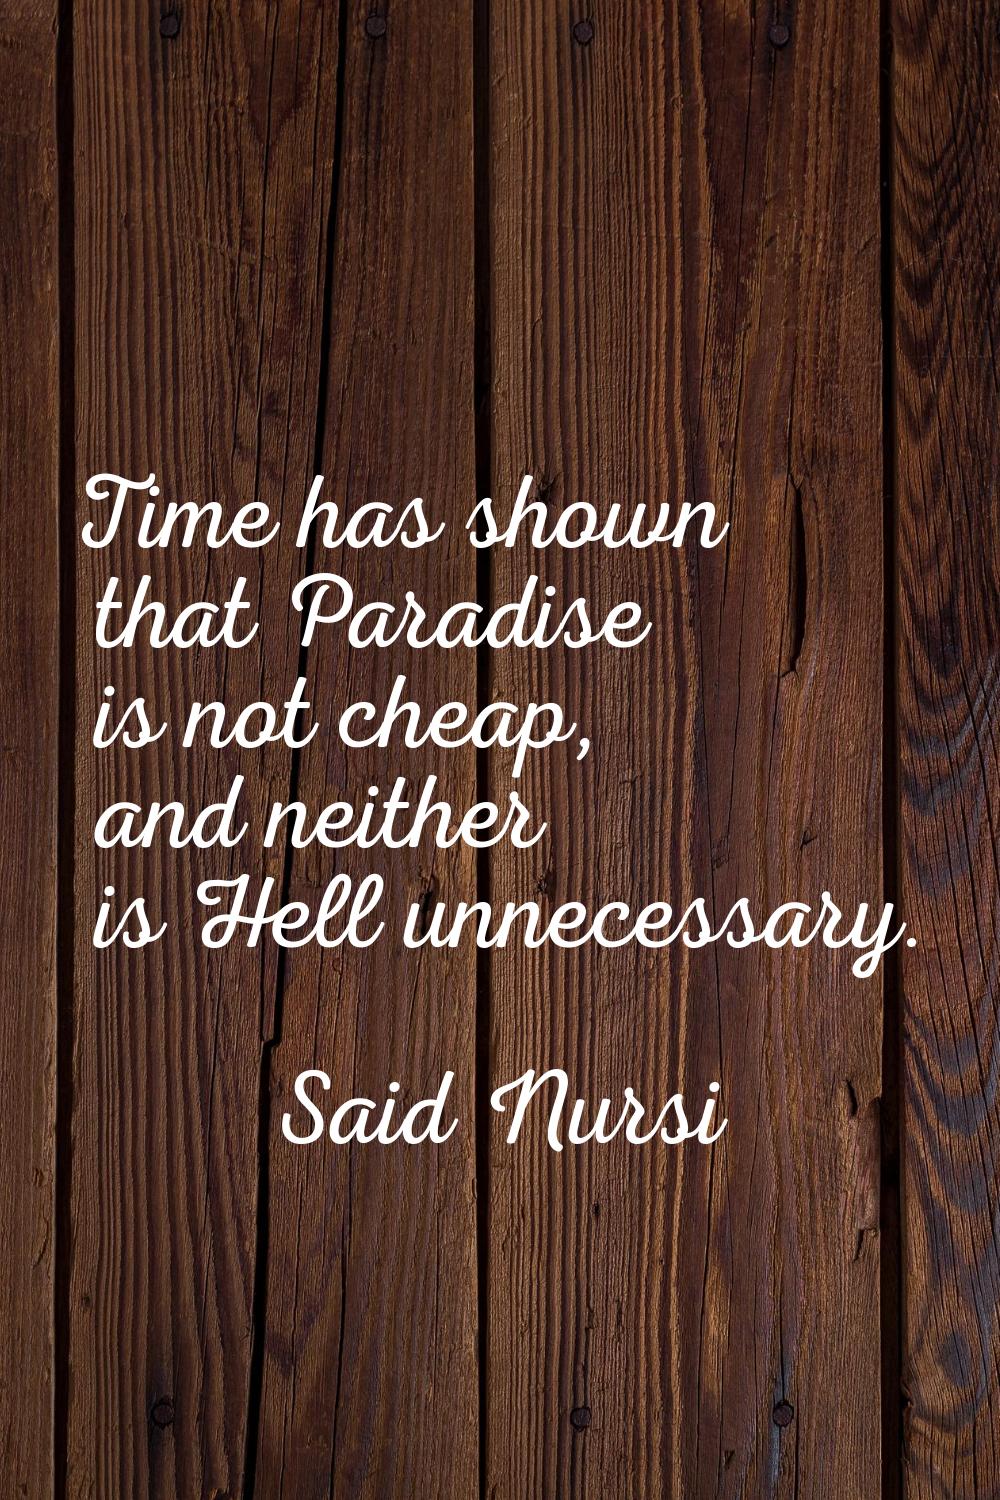 Time has shown that Paradise is not cheap, and neither is Hell unnecessary.